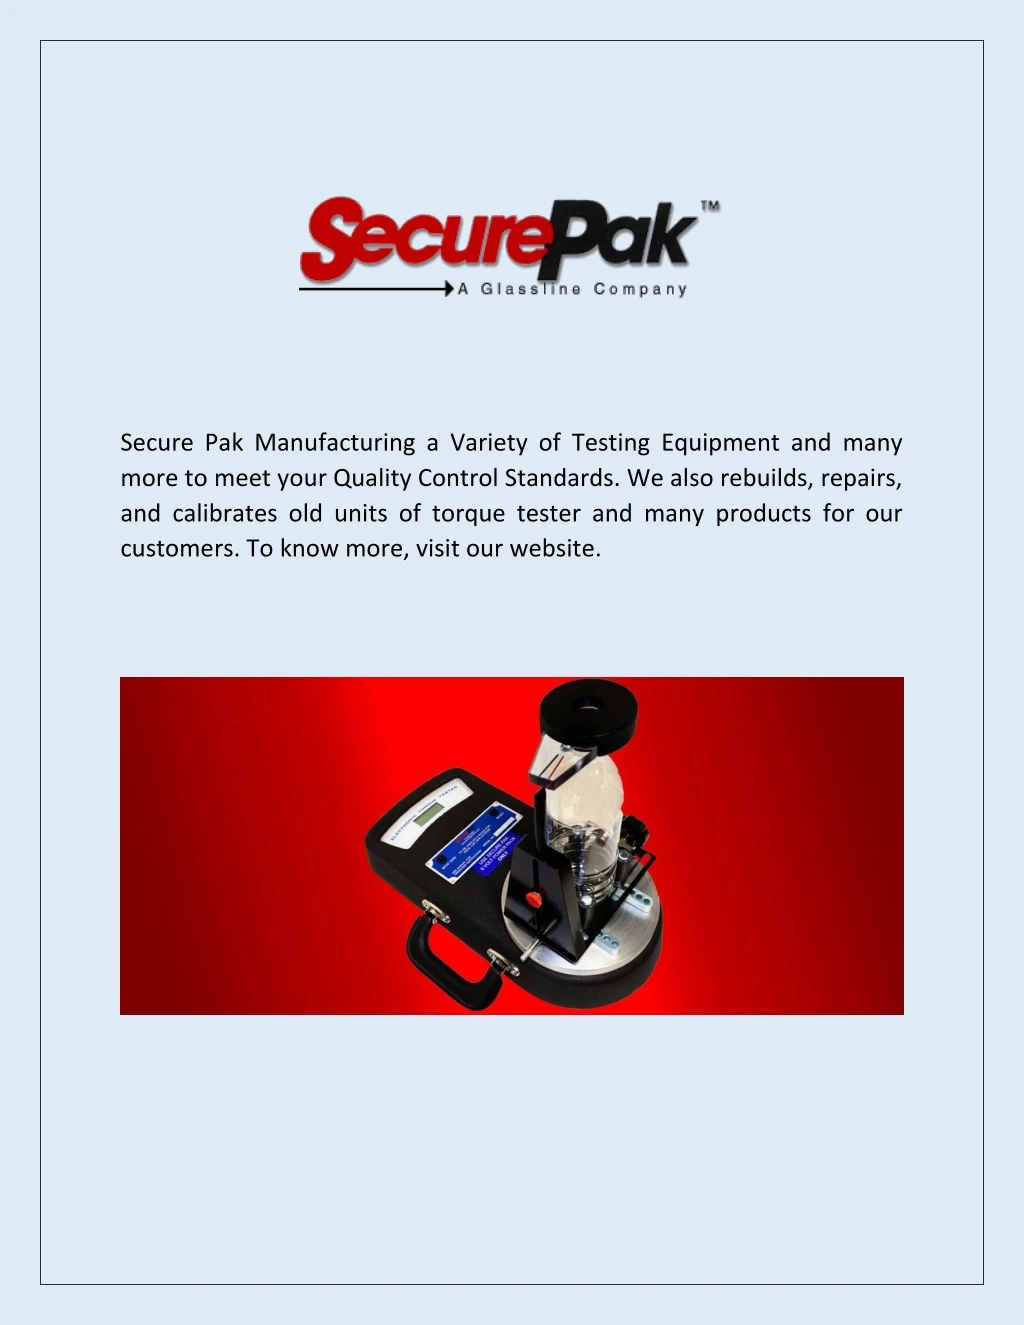 secure pak manufacturing a variety of testing